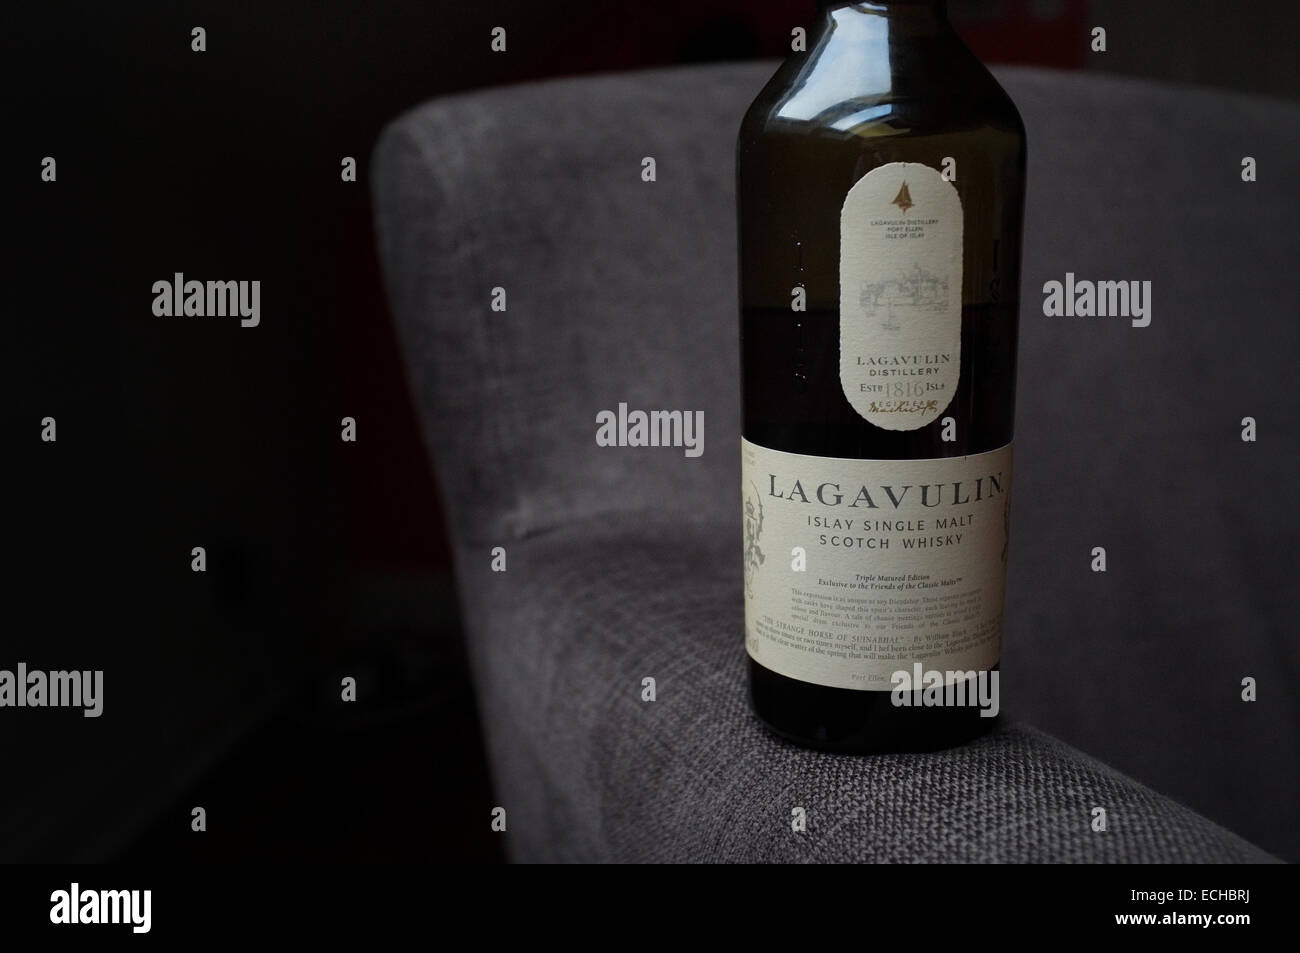 A close up horizontal view of a bottle of rare special edition Lagavulin Scotch Single Malt Whisky. Stock Photo